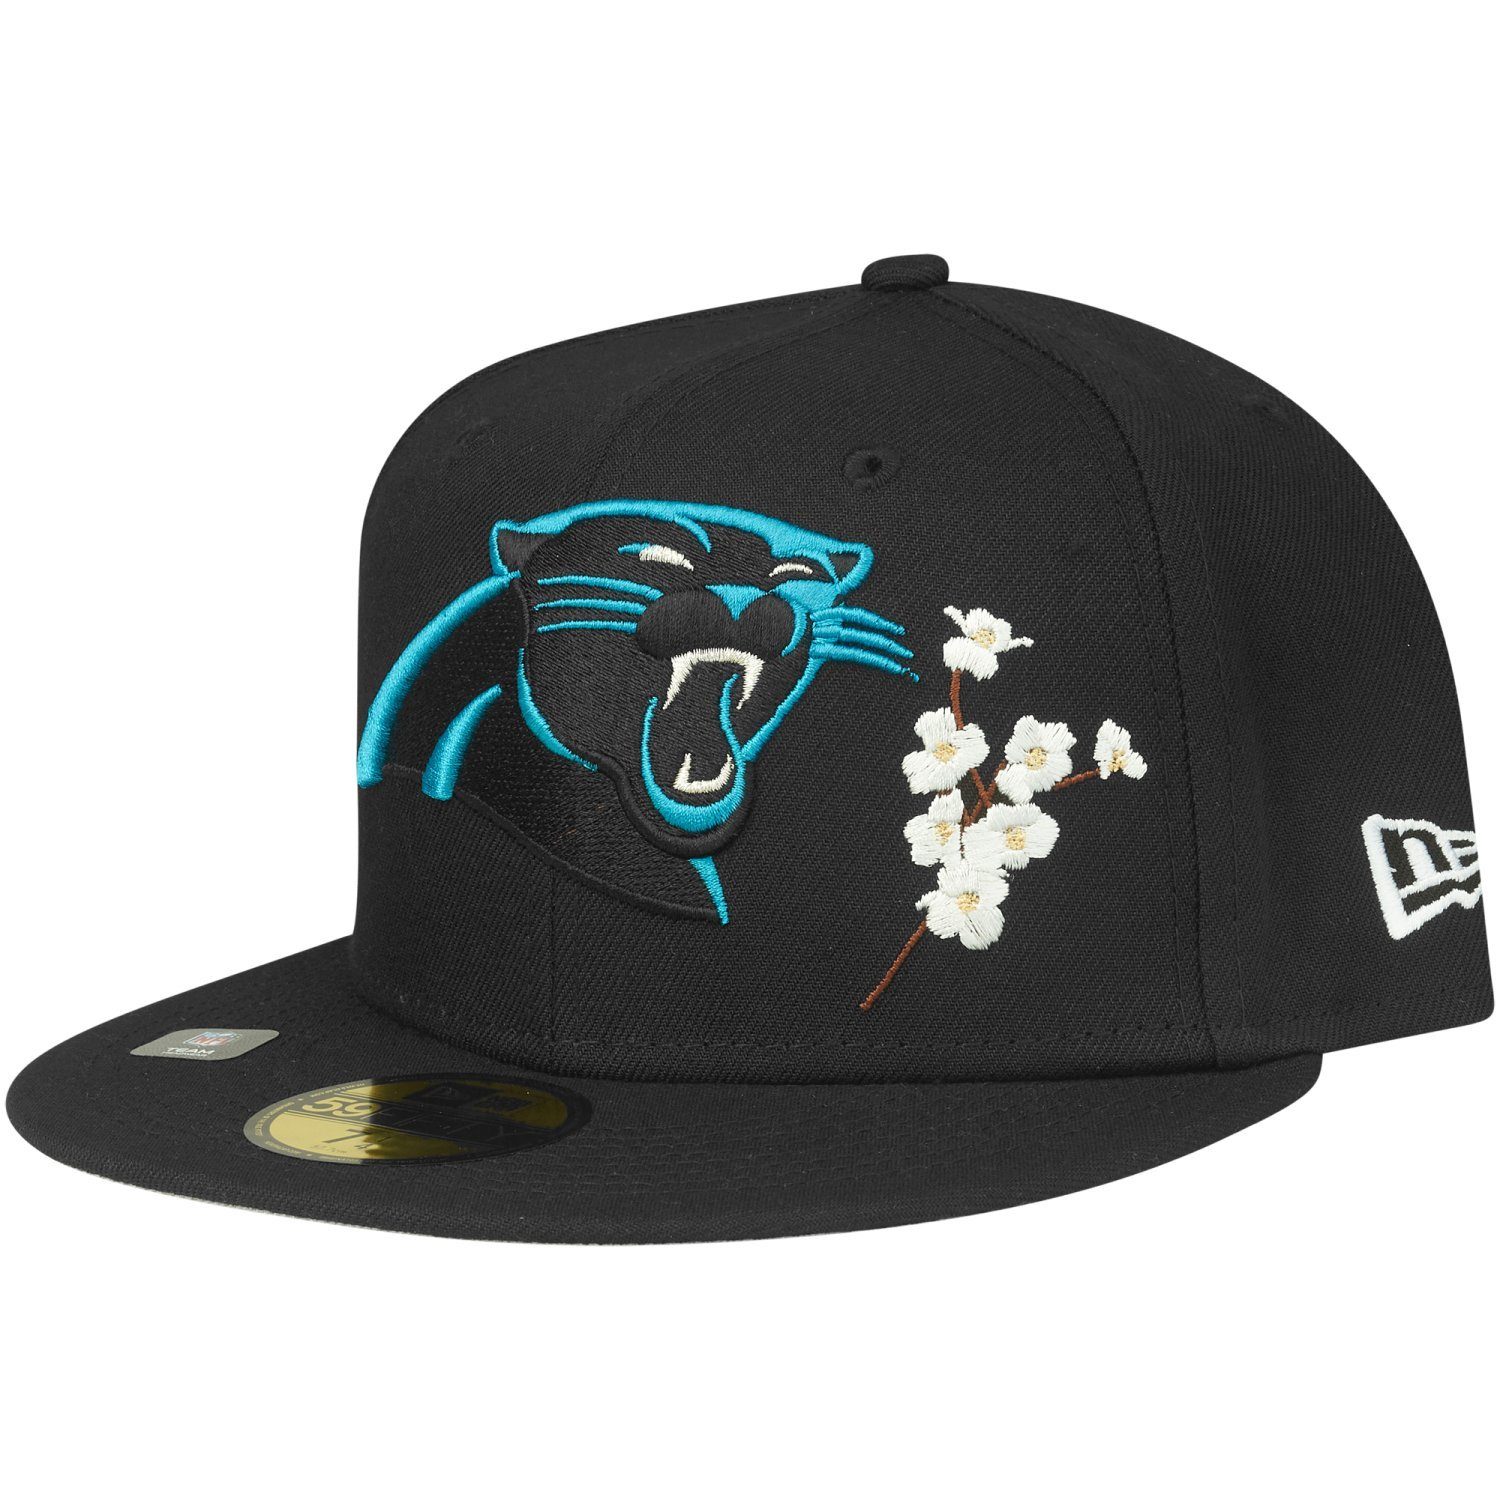 New Era Fitted Cap 59Fifty NFL CITY Carolina Panthers